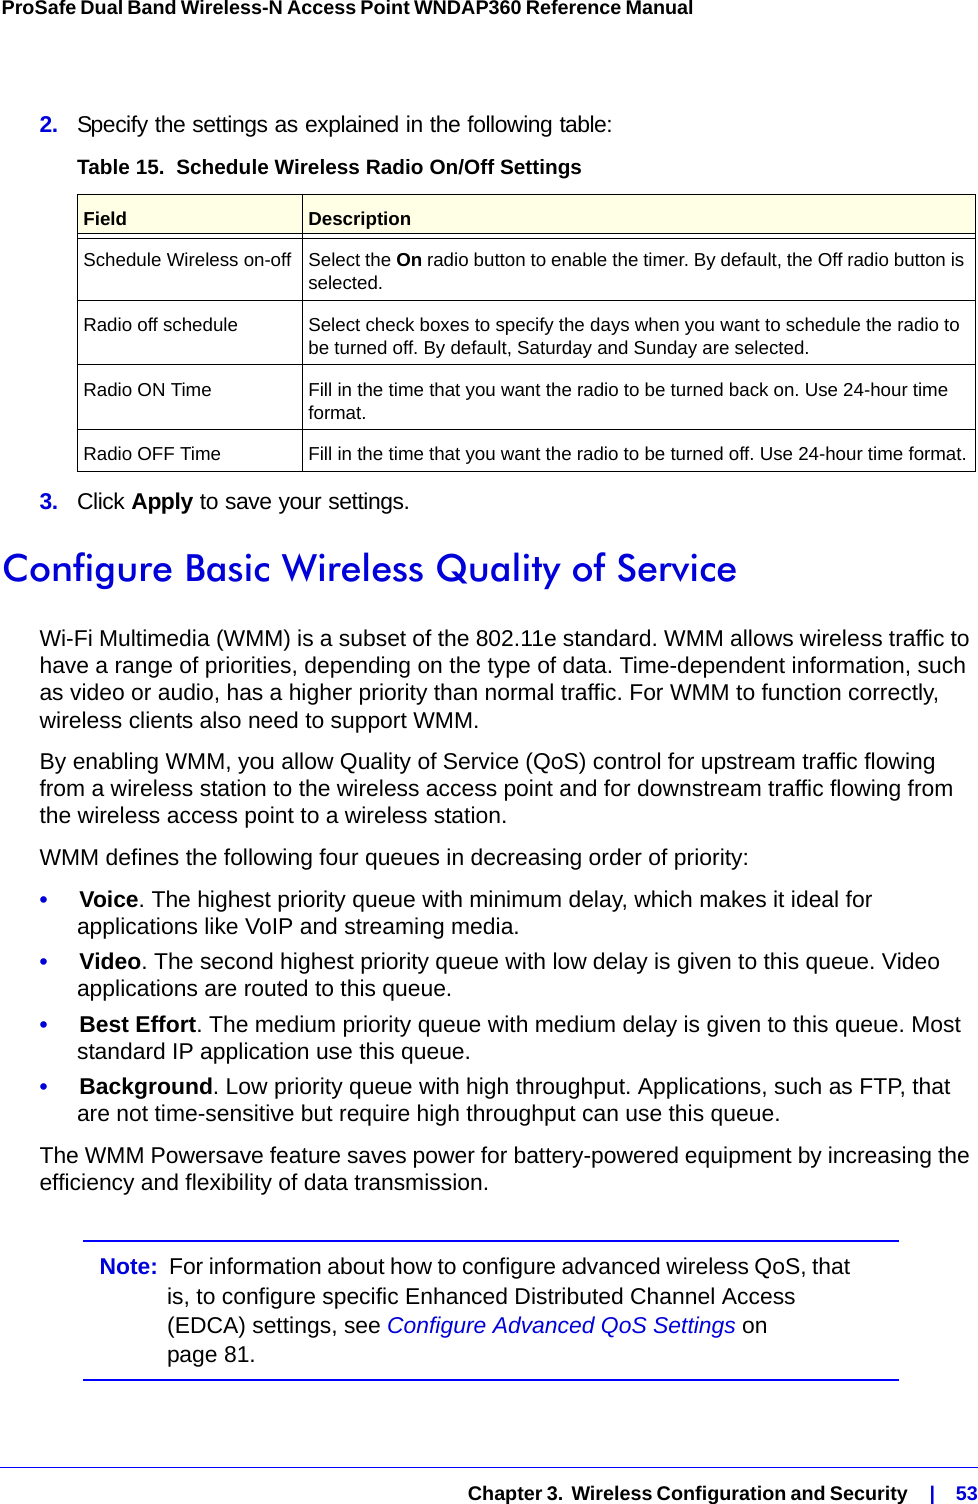   Chapter 3.  Wireless Configuration and Security    |    53ProSafe Dual Band Wireless-N Access Point WNDAP360 Reference Manual 2.  Specify the settings as explained in the following table:3.  Click Apply to save your settings.Configure Basic Wireless Quality of ServiceWi-Fi Multimedia (WMM) is a subset of the 802.11e standard. WMM allows wireless traffic to have a range of priorities, depending on the type of data. Time-dependent information, such as video or audio, has a higher priority than normal traffic. For WMM to function correctly, wireless clients also need to support WMM.By enabling WMM, you allow Quality of Service (QoS) control for upstream traffic flowing from a wireless station to the wireless access point and for downstream traffic flowing from the wireless access point to a wireless station.WMM defines the following four queues in decreasing order of priority:•     Voice. The highest priority queue with minimum delay, which makes it ideal for applications like VoIP and streaming media.•     Video. The second highest priority queue with low delay is given to this queue. Video applications are routed to this queue.•     Best Effort. The medium priority queue with medium delay is given to this queue. Most standard IP application use this queue.•     Background. Low priority queue with high throughput. Applications, such as FTP, that are not time-sensitive but require high throughput can use this queue.The WMM Powersave feature saves power for battery-powered equipment by increasing the efficiency and flexibility of data transmission.Note:  For information about how to configure advanced wireless QoS, that is, to configure specific Enhanced Distributed Channel Access (EDCA) settings, see Configure Advanced QoS Settings on page 81.Table 15.  Schedule Wireless Radio On/Off Settings Field DescriptionSchedule Wireless on-off Select the On radio button to enable the timer. By default, the Off radio button is selected.Radio off schedule Select check boxes to specify the days when you want to schedule the radio to be turned off. By default, Saturday and Sunday are selected.Radio ON Time Fill in the time that you want the radio to be turned back on. Use 24-hour time format.Radio OFF Time Fill in the time that you want the radio to be turned off. Use 24-hour time format.